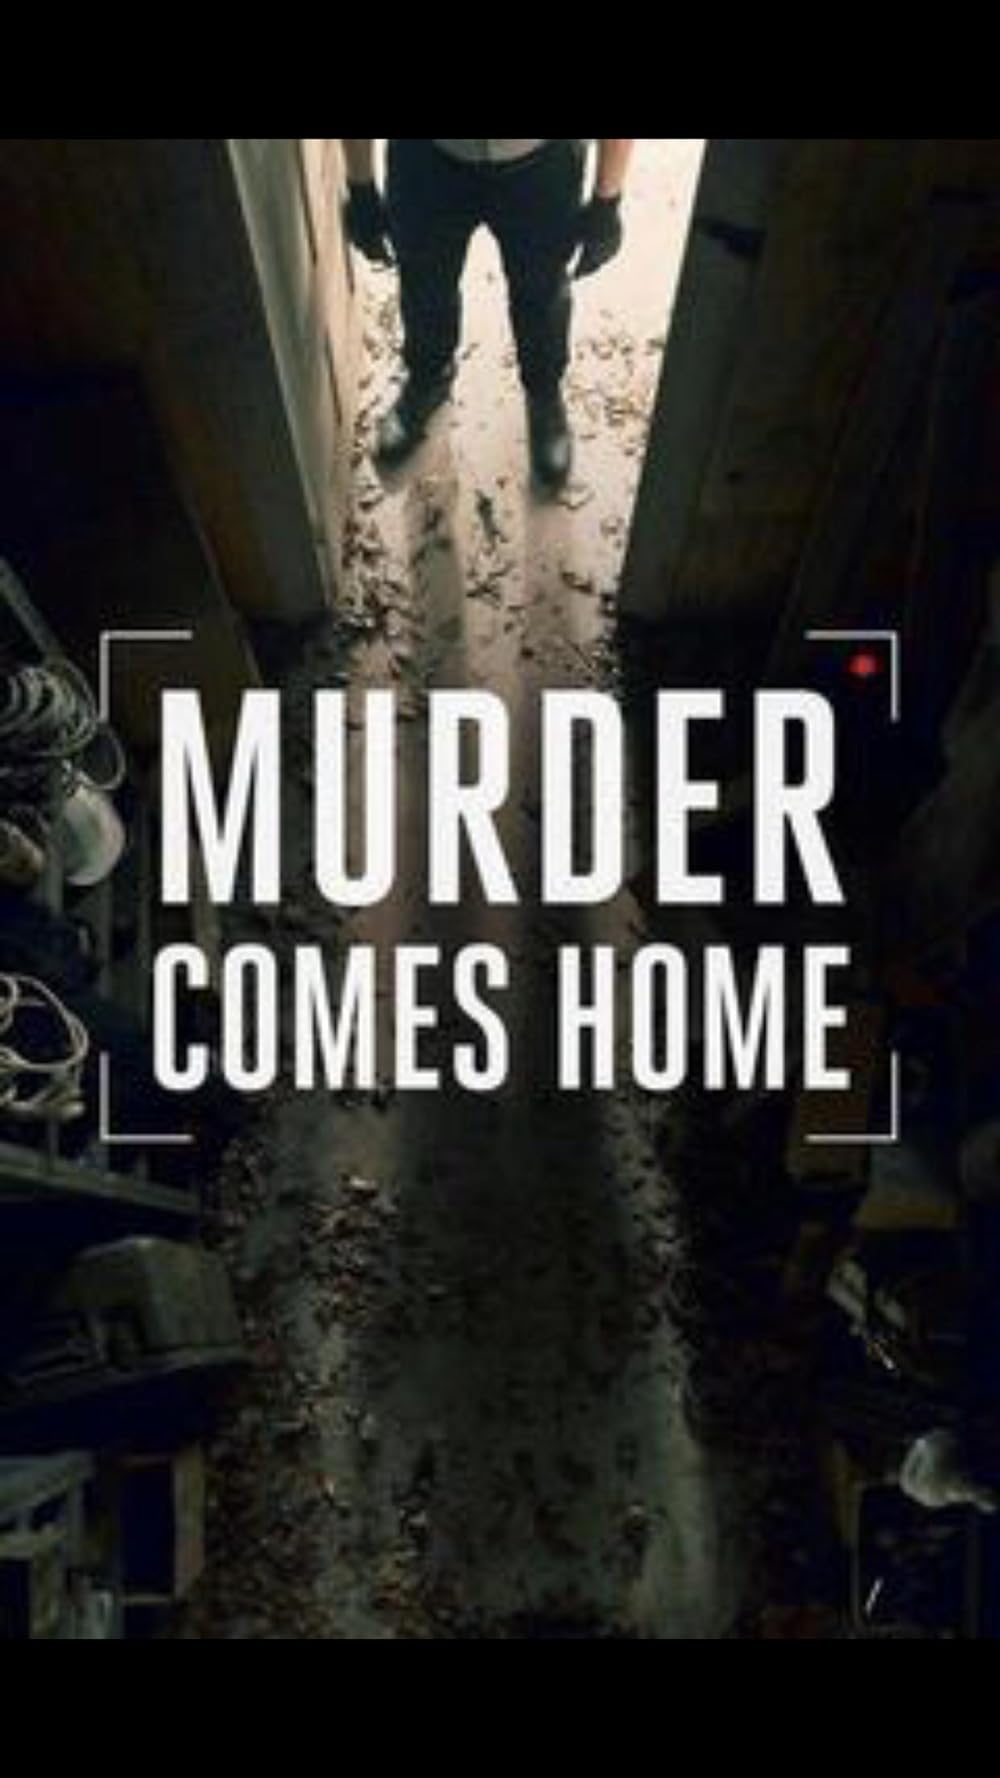 Murder Comes Home